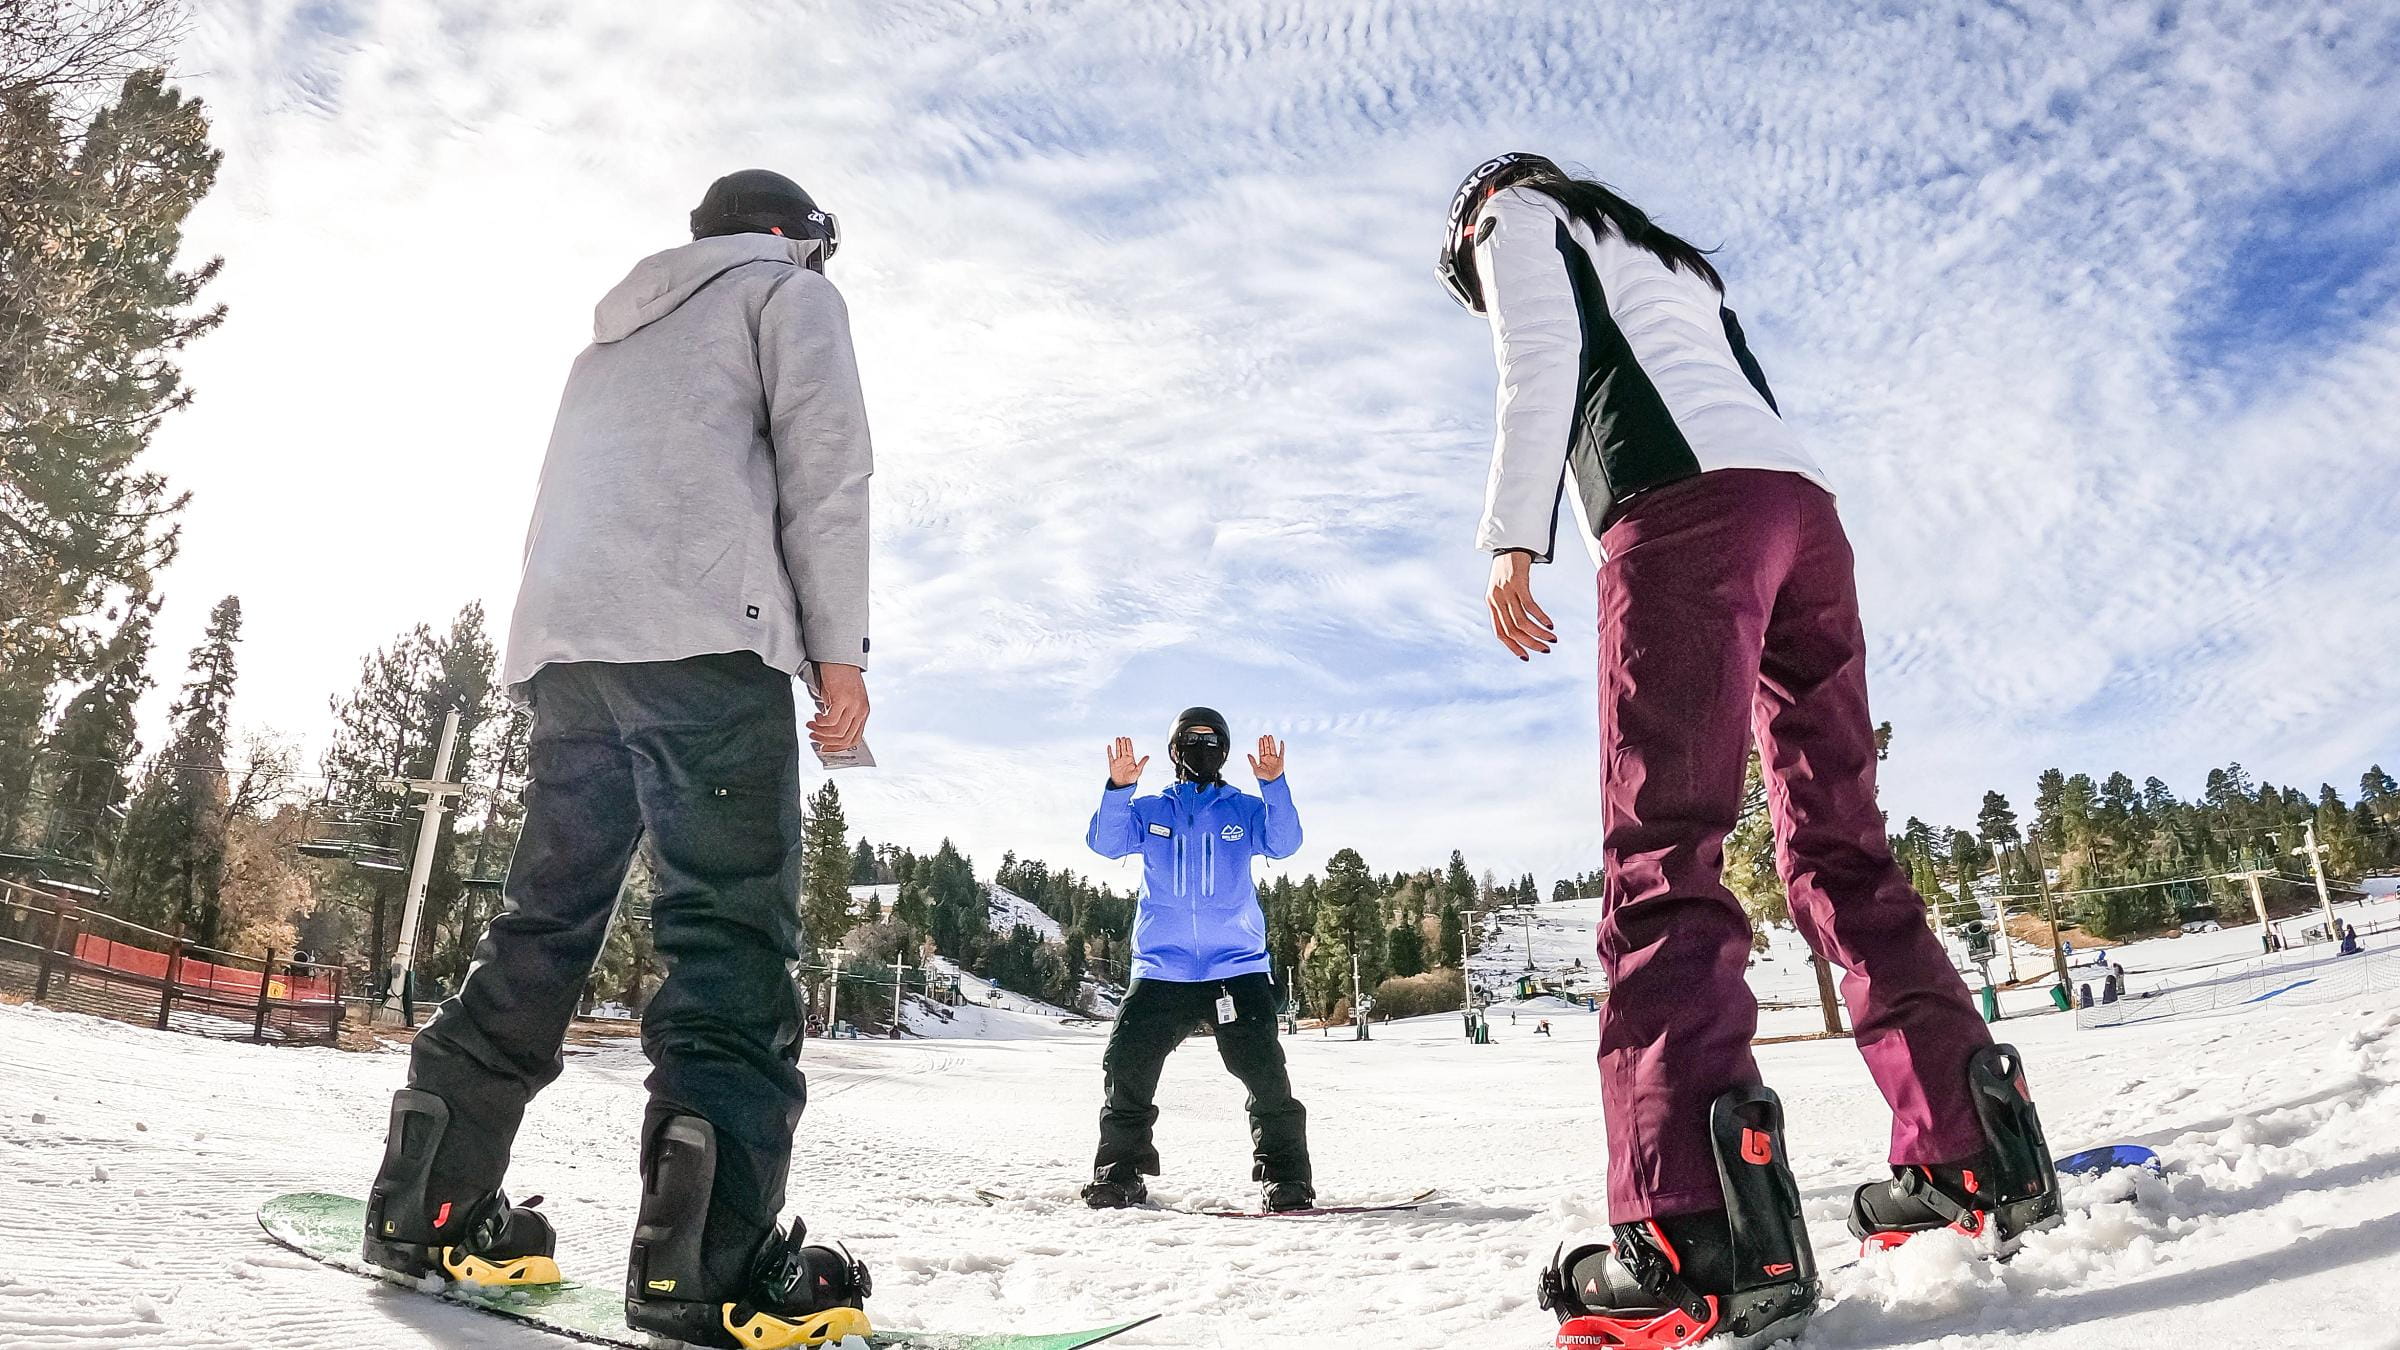 Two snowboarders facing snowboard instructor.